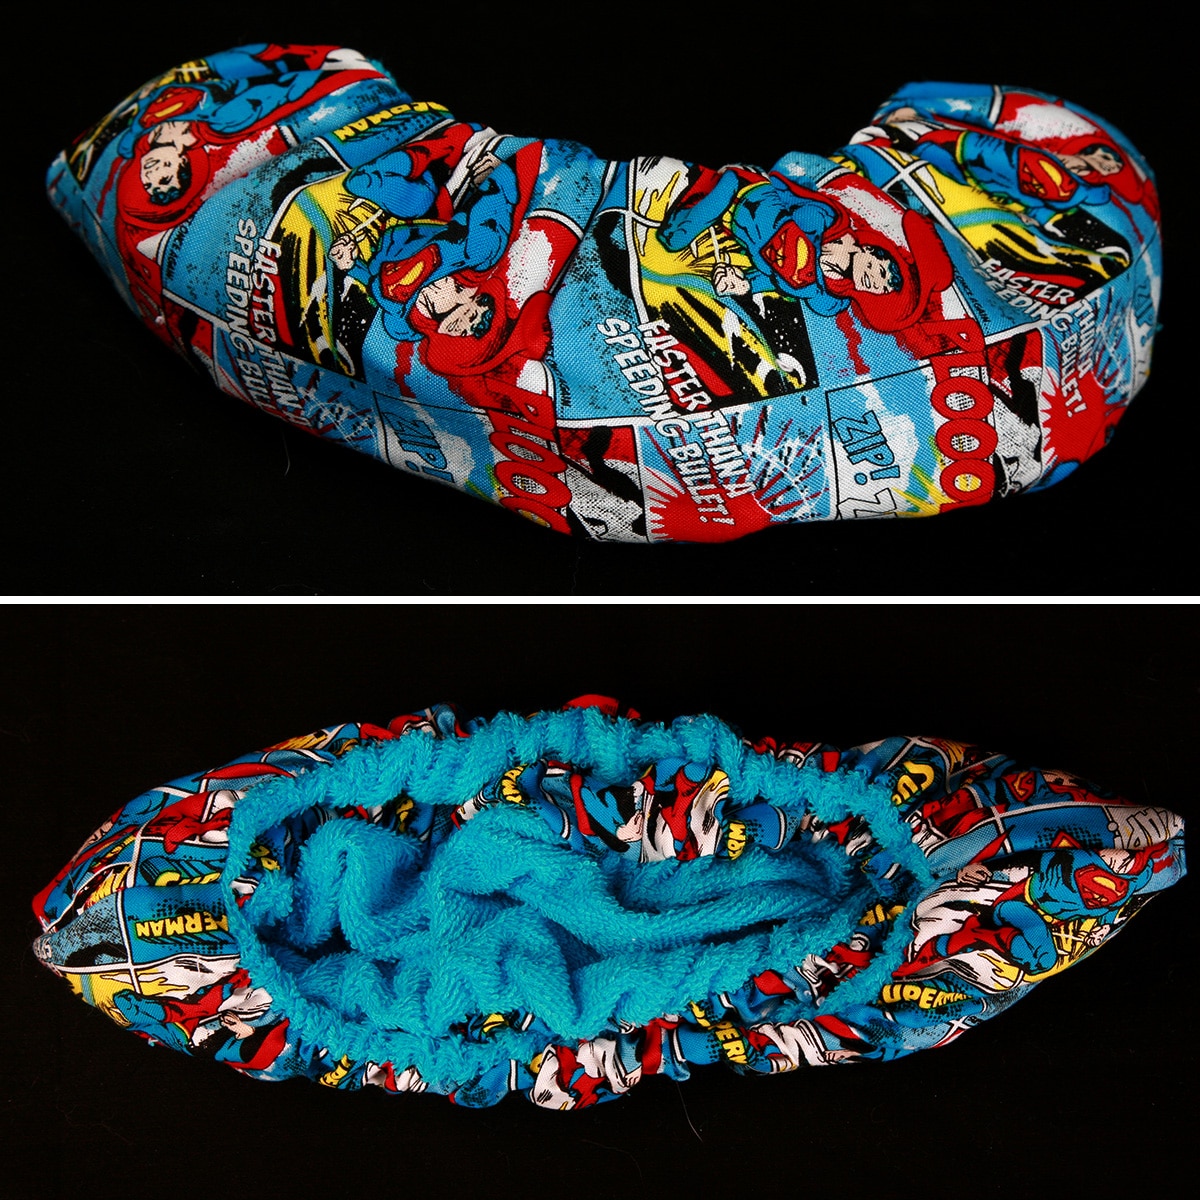 A 2 photo image showing two different views of a pair of soakers. The inside is bright turquoise terrycloth, the outside is a blue and red Superman printed cotton.